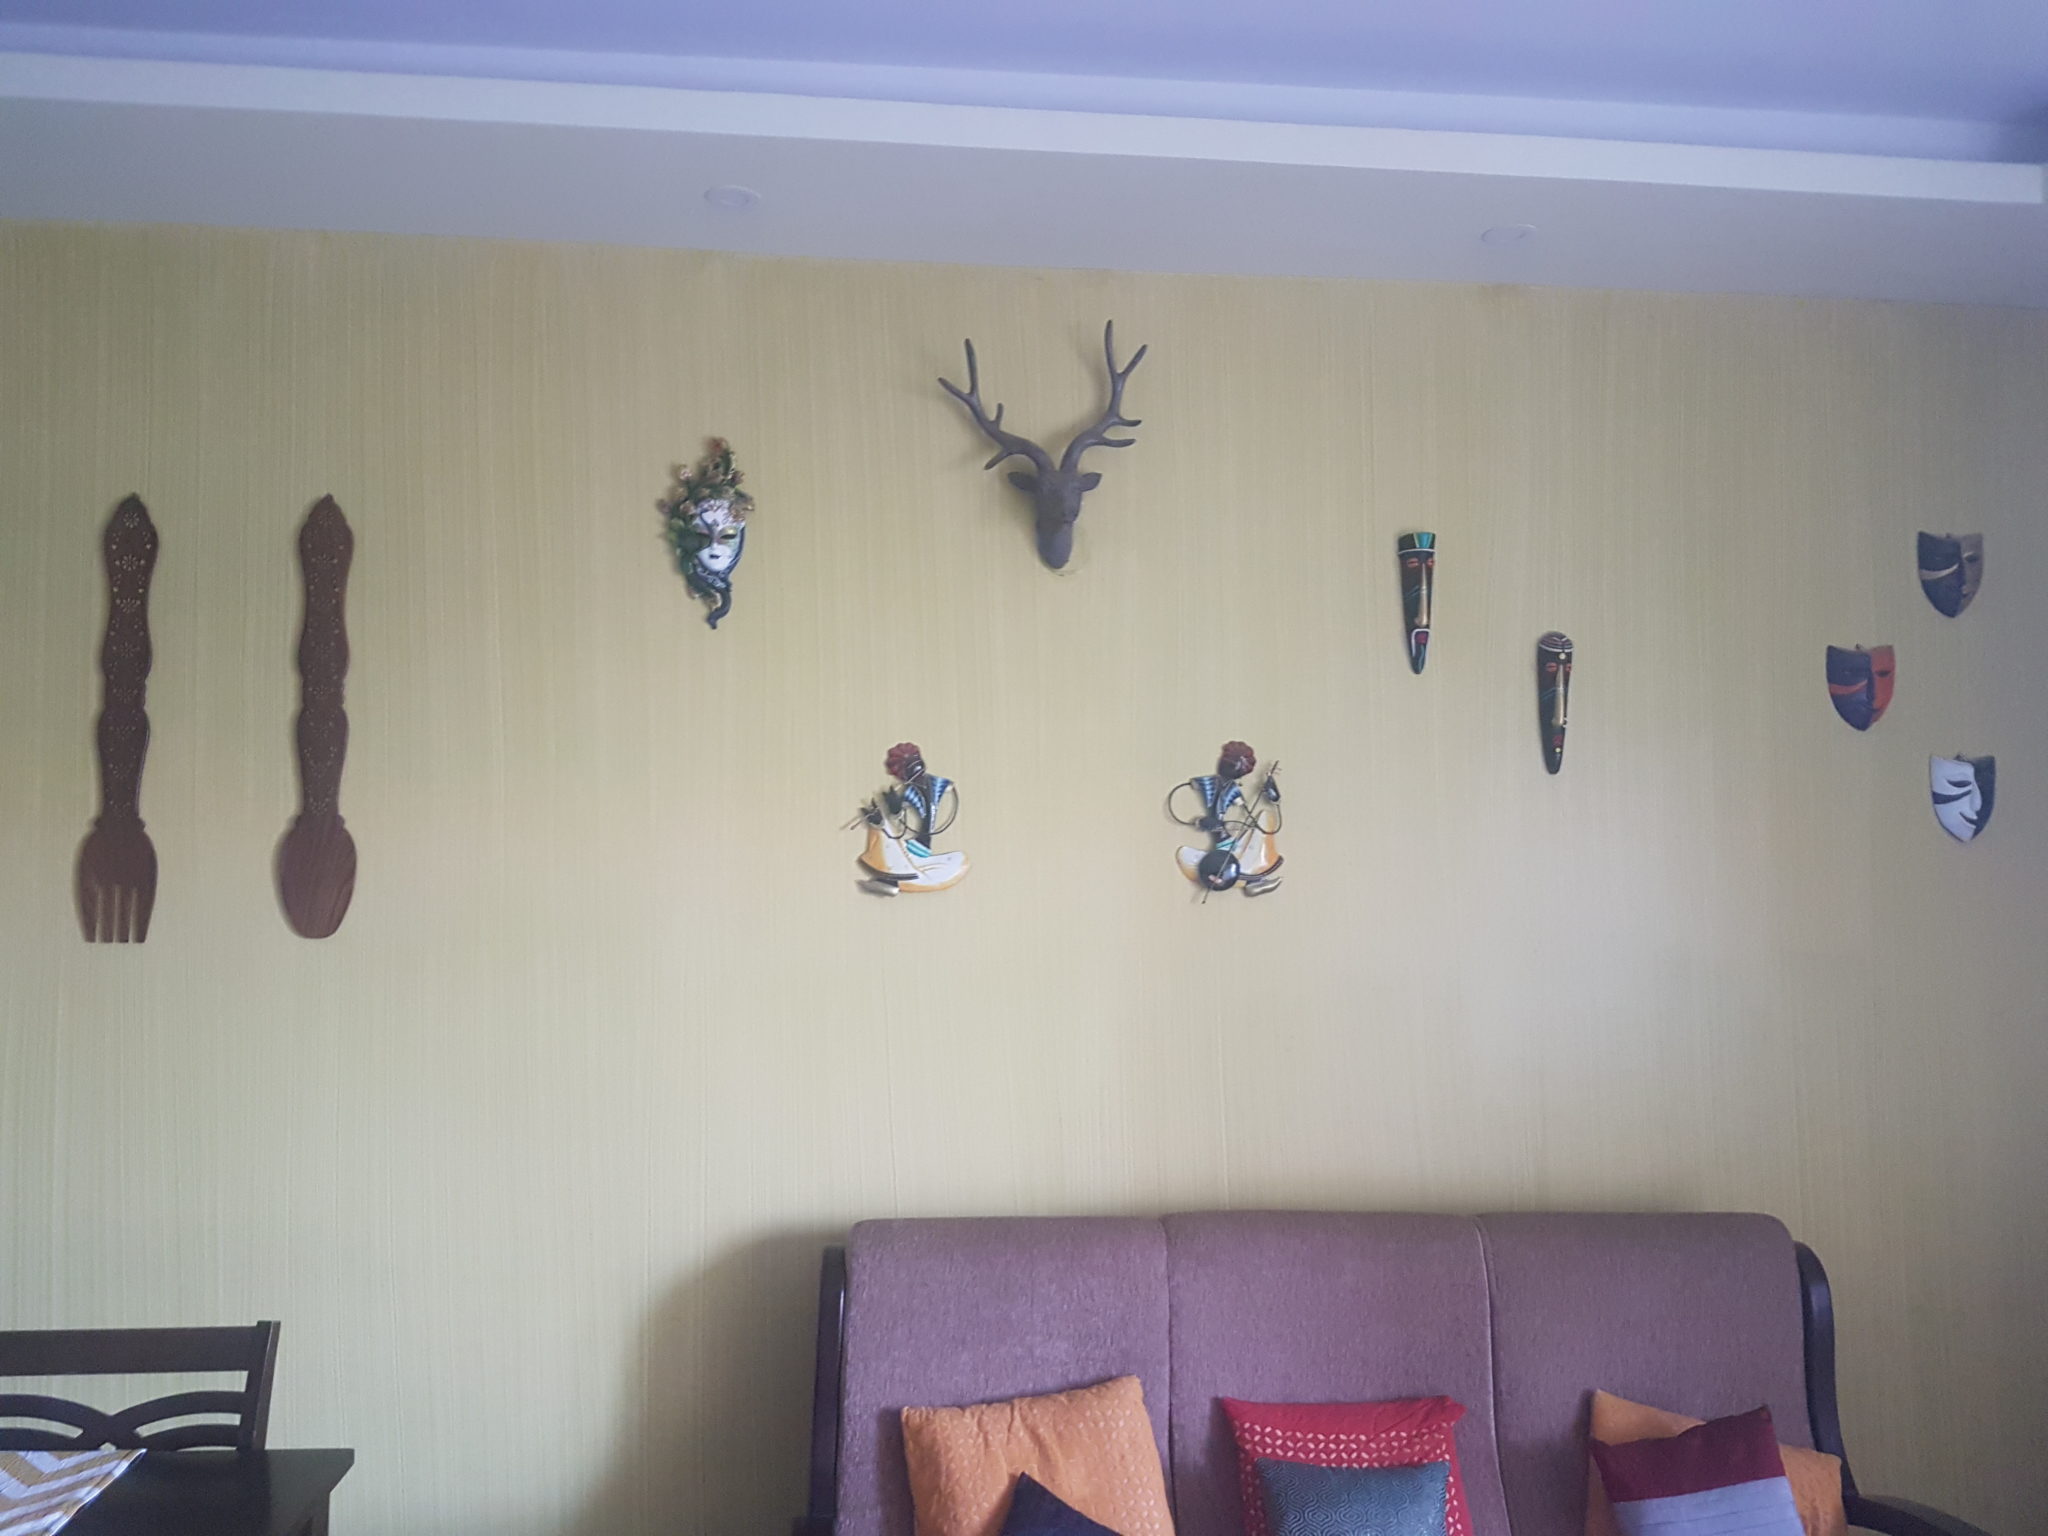 Mask themed wall in drawing room